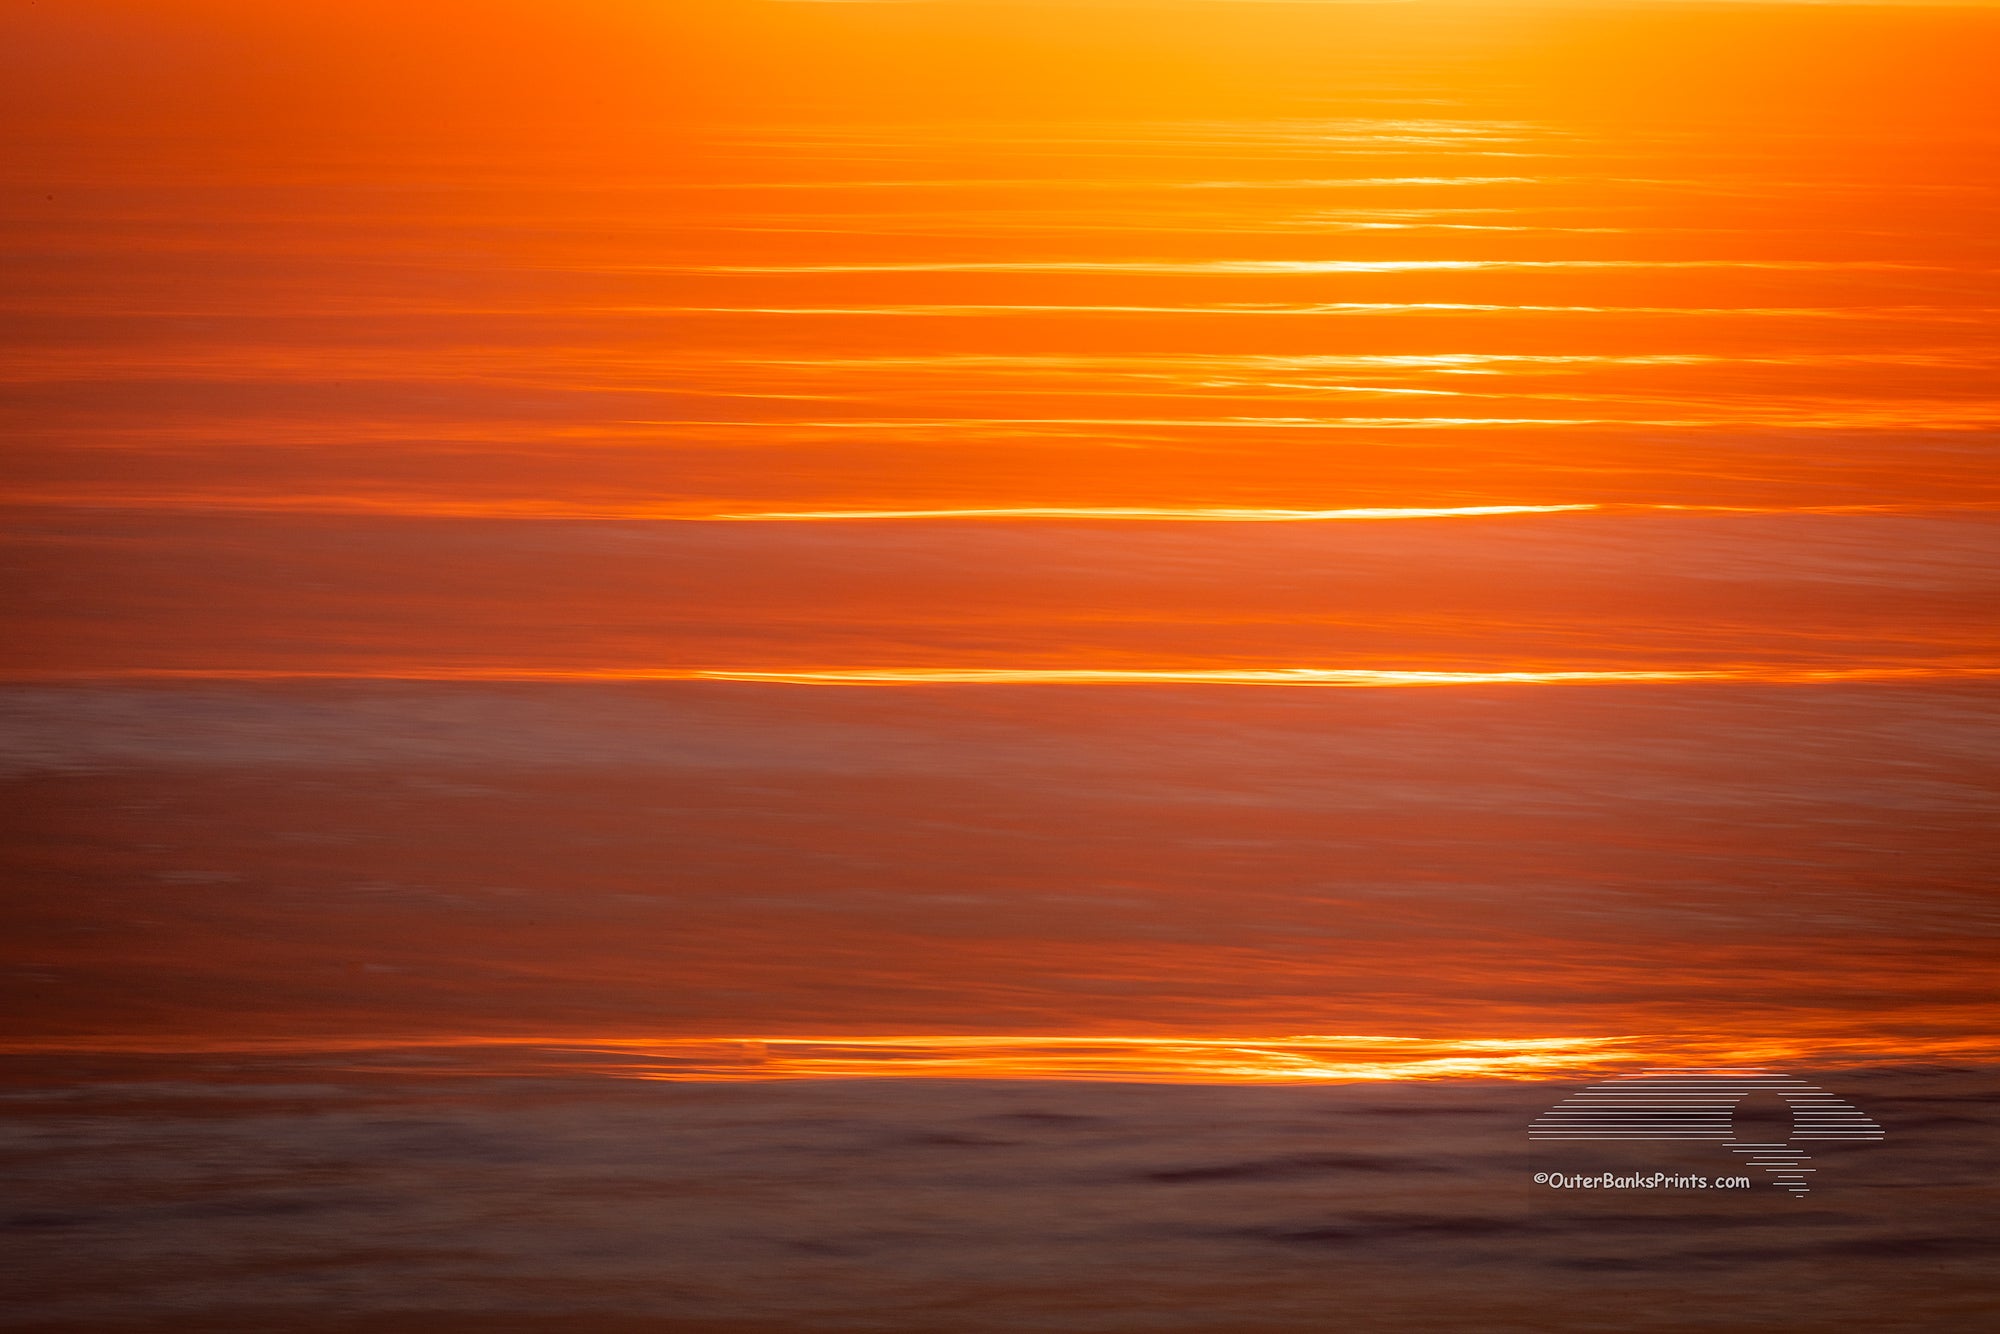 Kitty Hawk Surf at sunrise with a long shutter speed and camera movement.